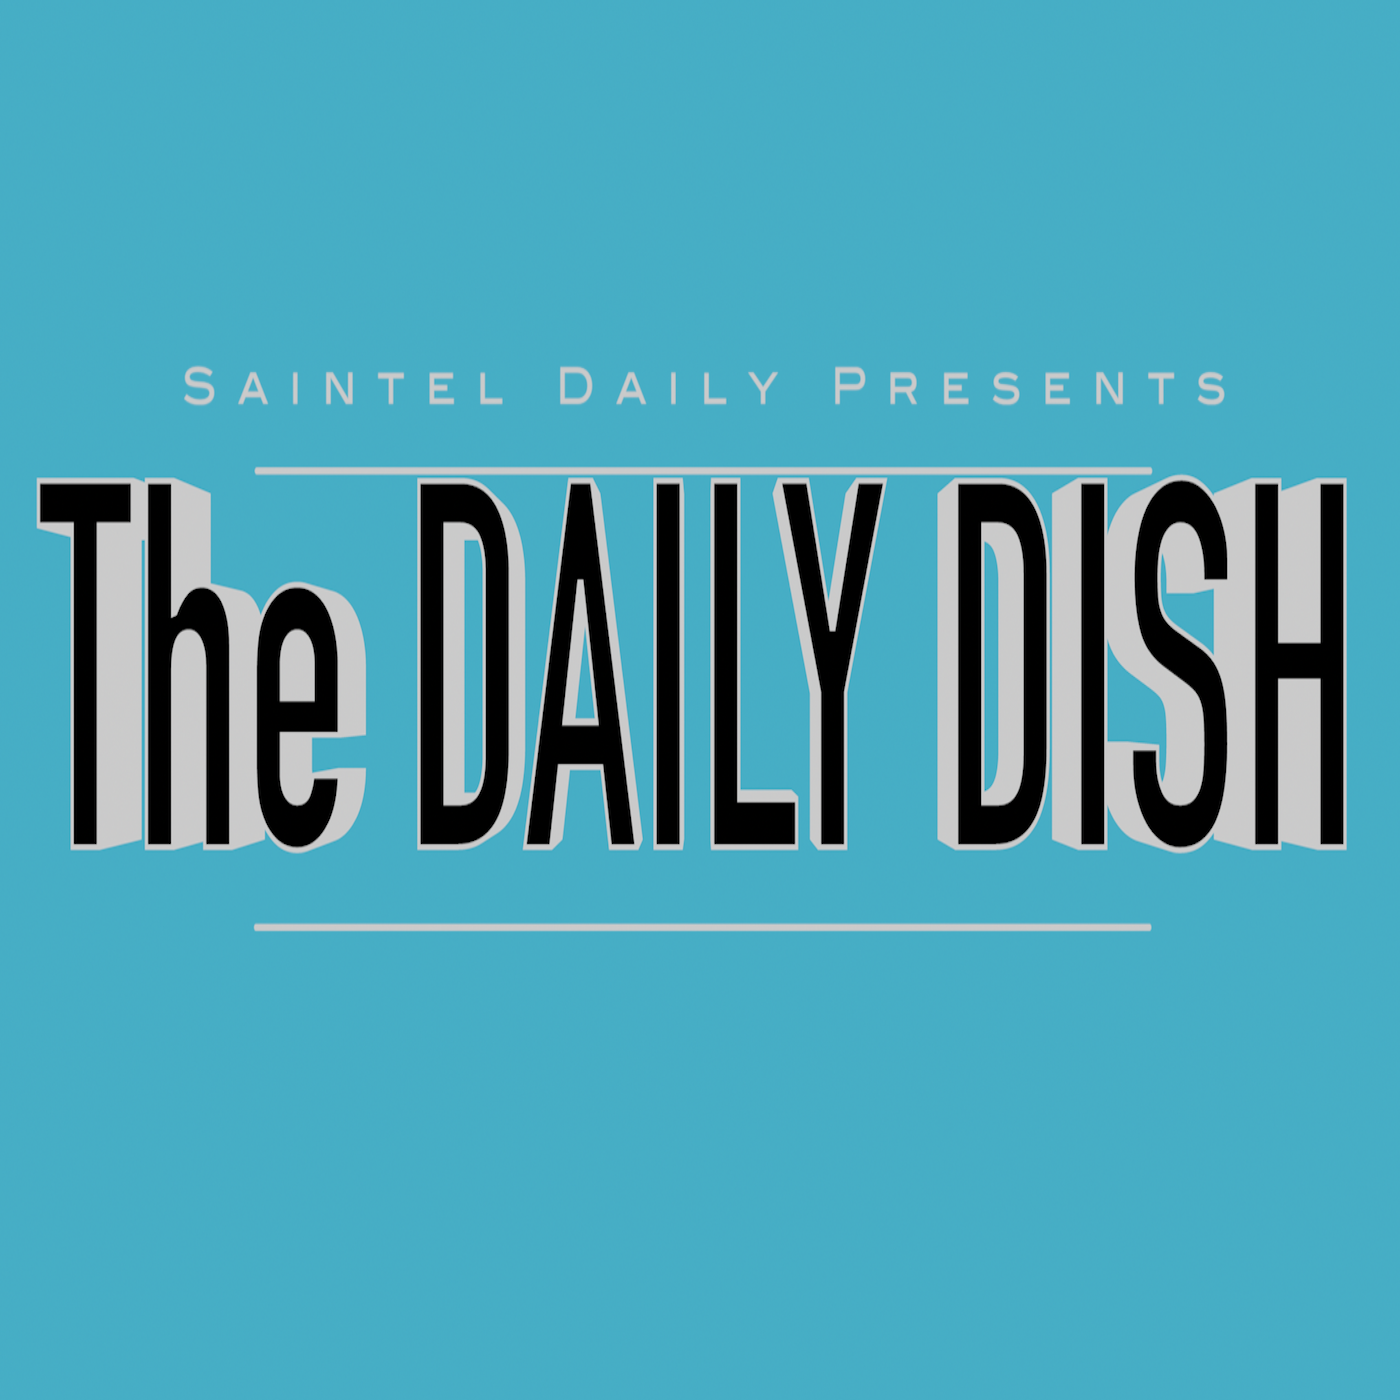 The Daily Dish